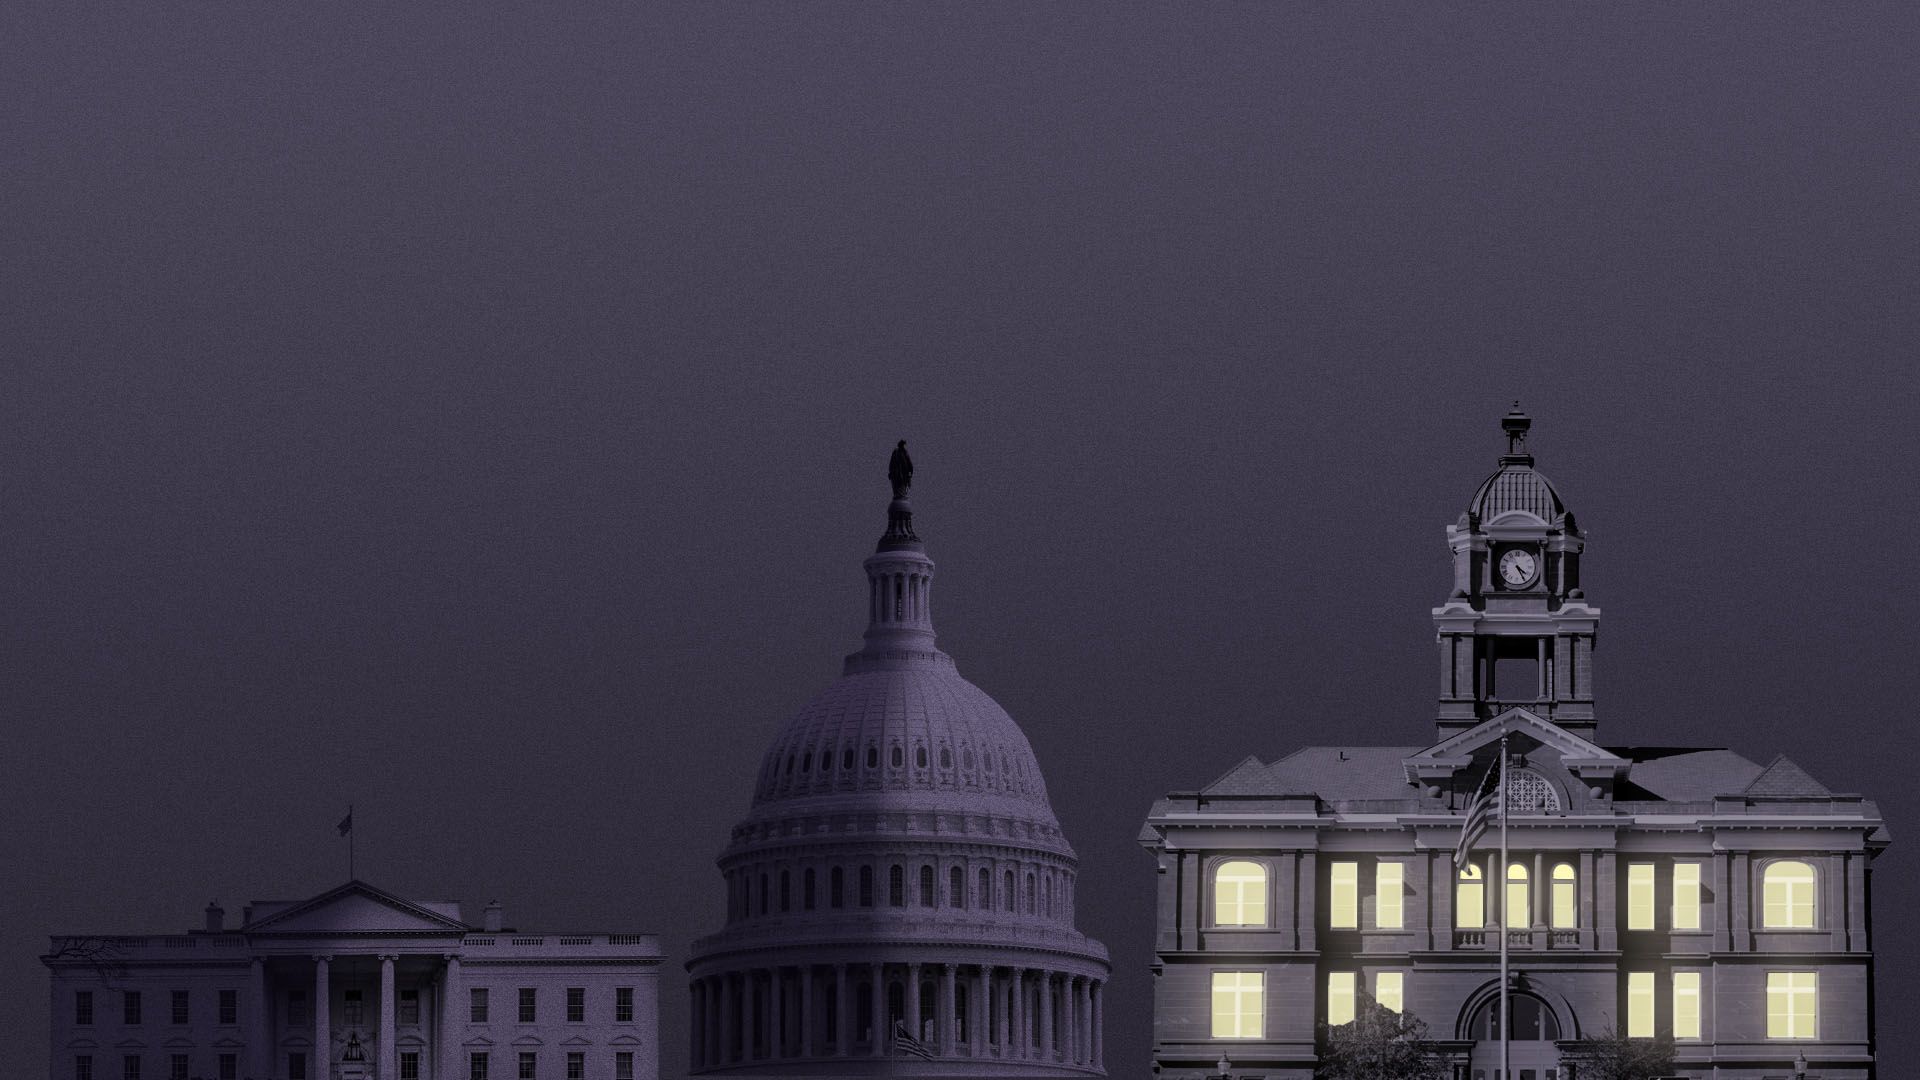 Illustration of the White House and the Capitol Building in darkness next to a city hall with all the lights on